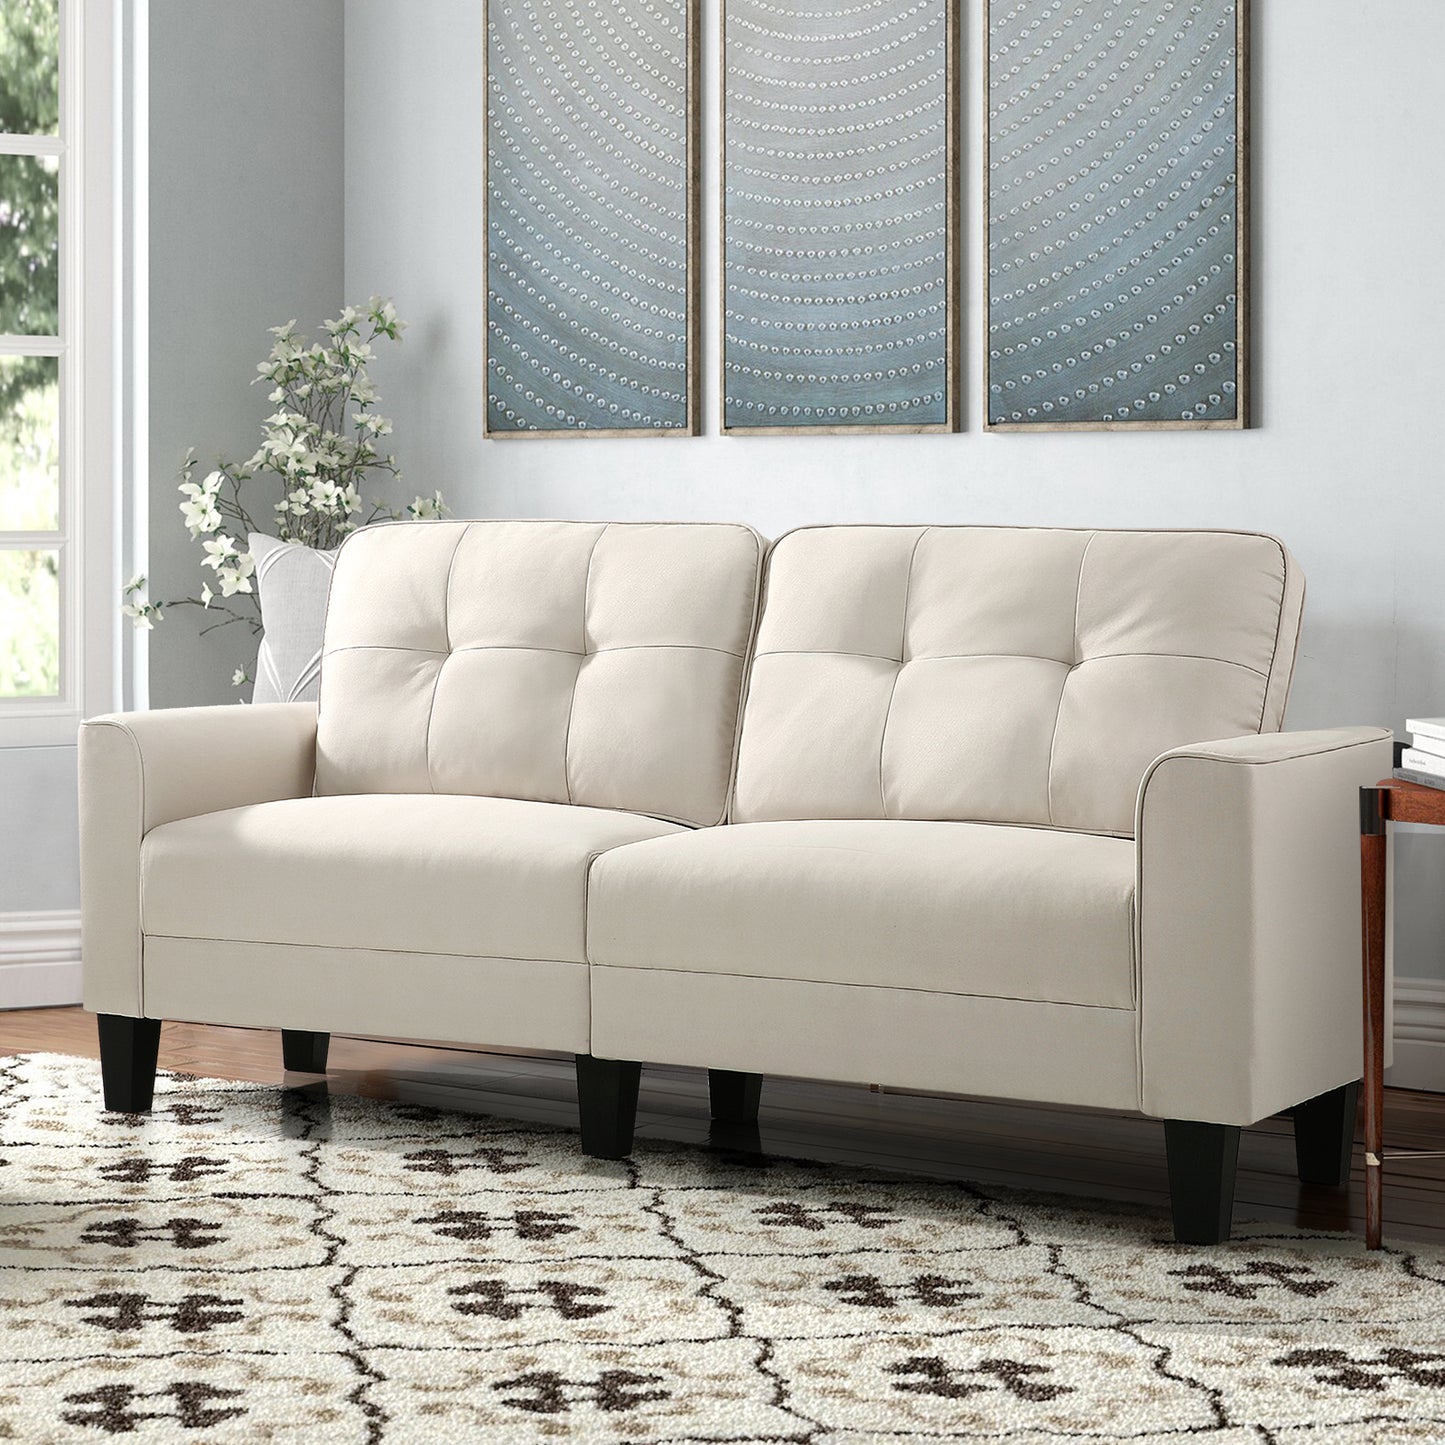 3-Seat Sofa,Soft and Comfortable,Suitable for Living Room, Bedroom, Apartments Small Sofa